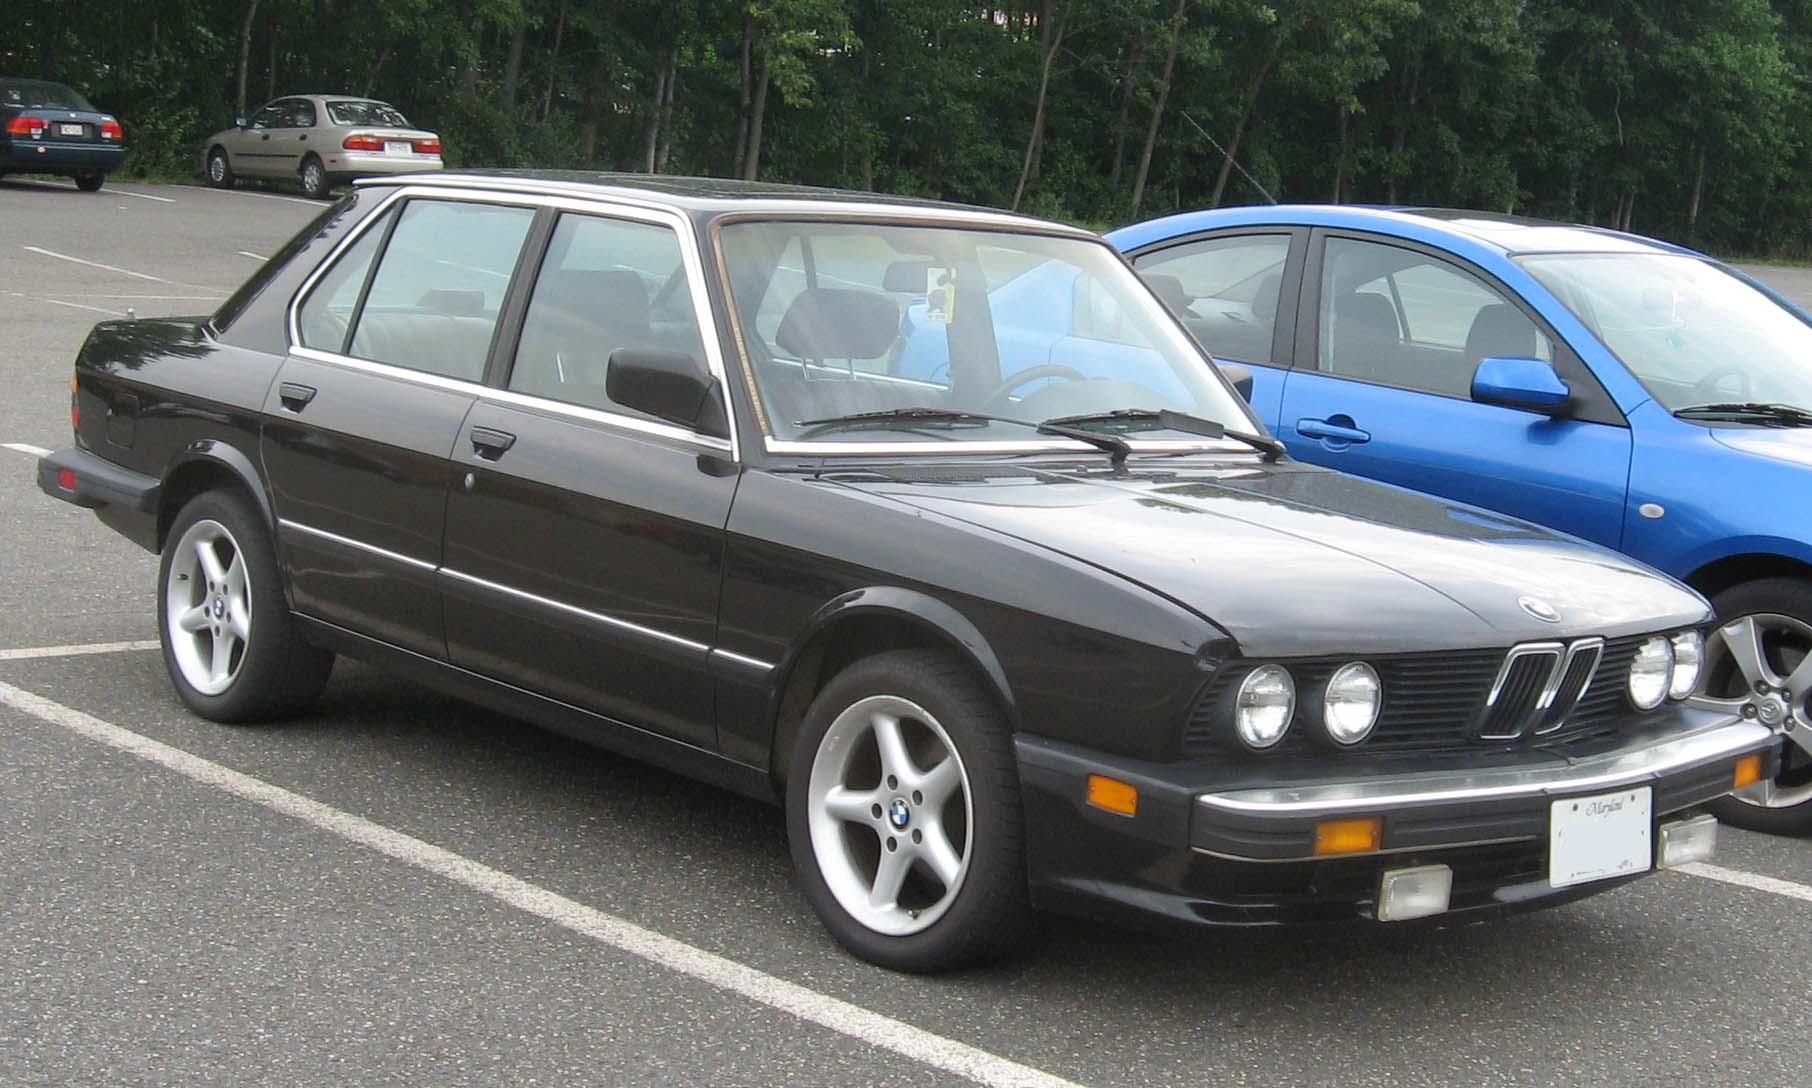 bmw 525 | Cars Pictures Gallery